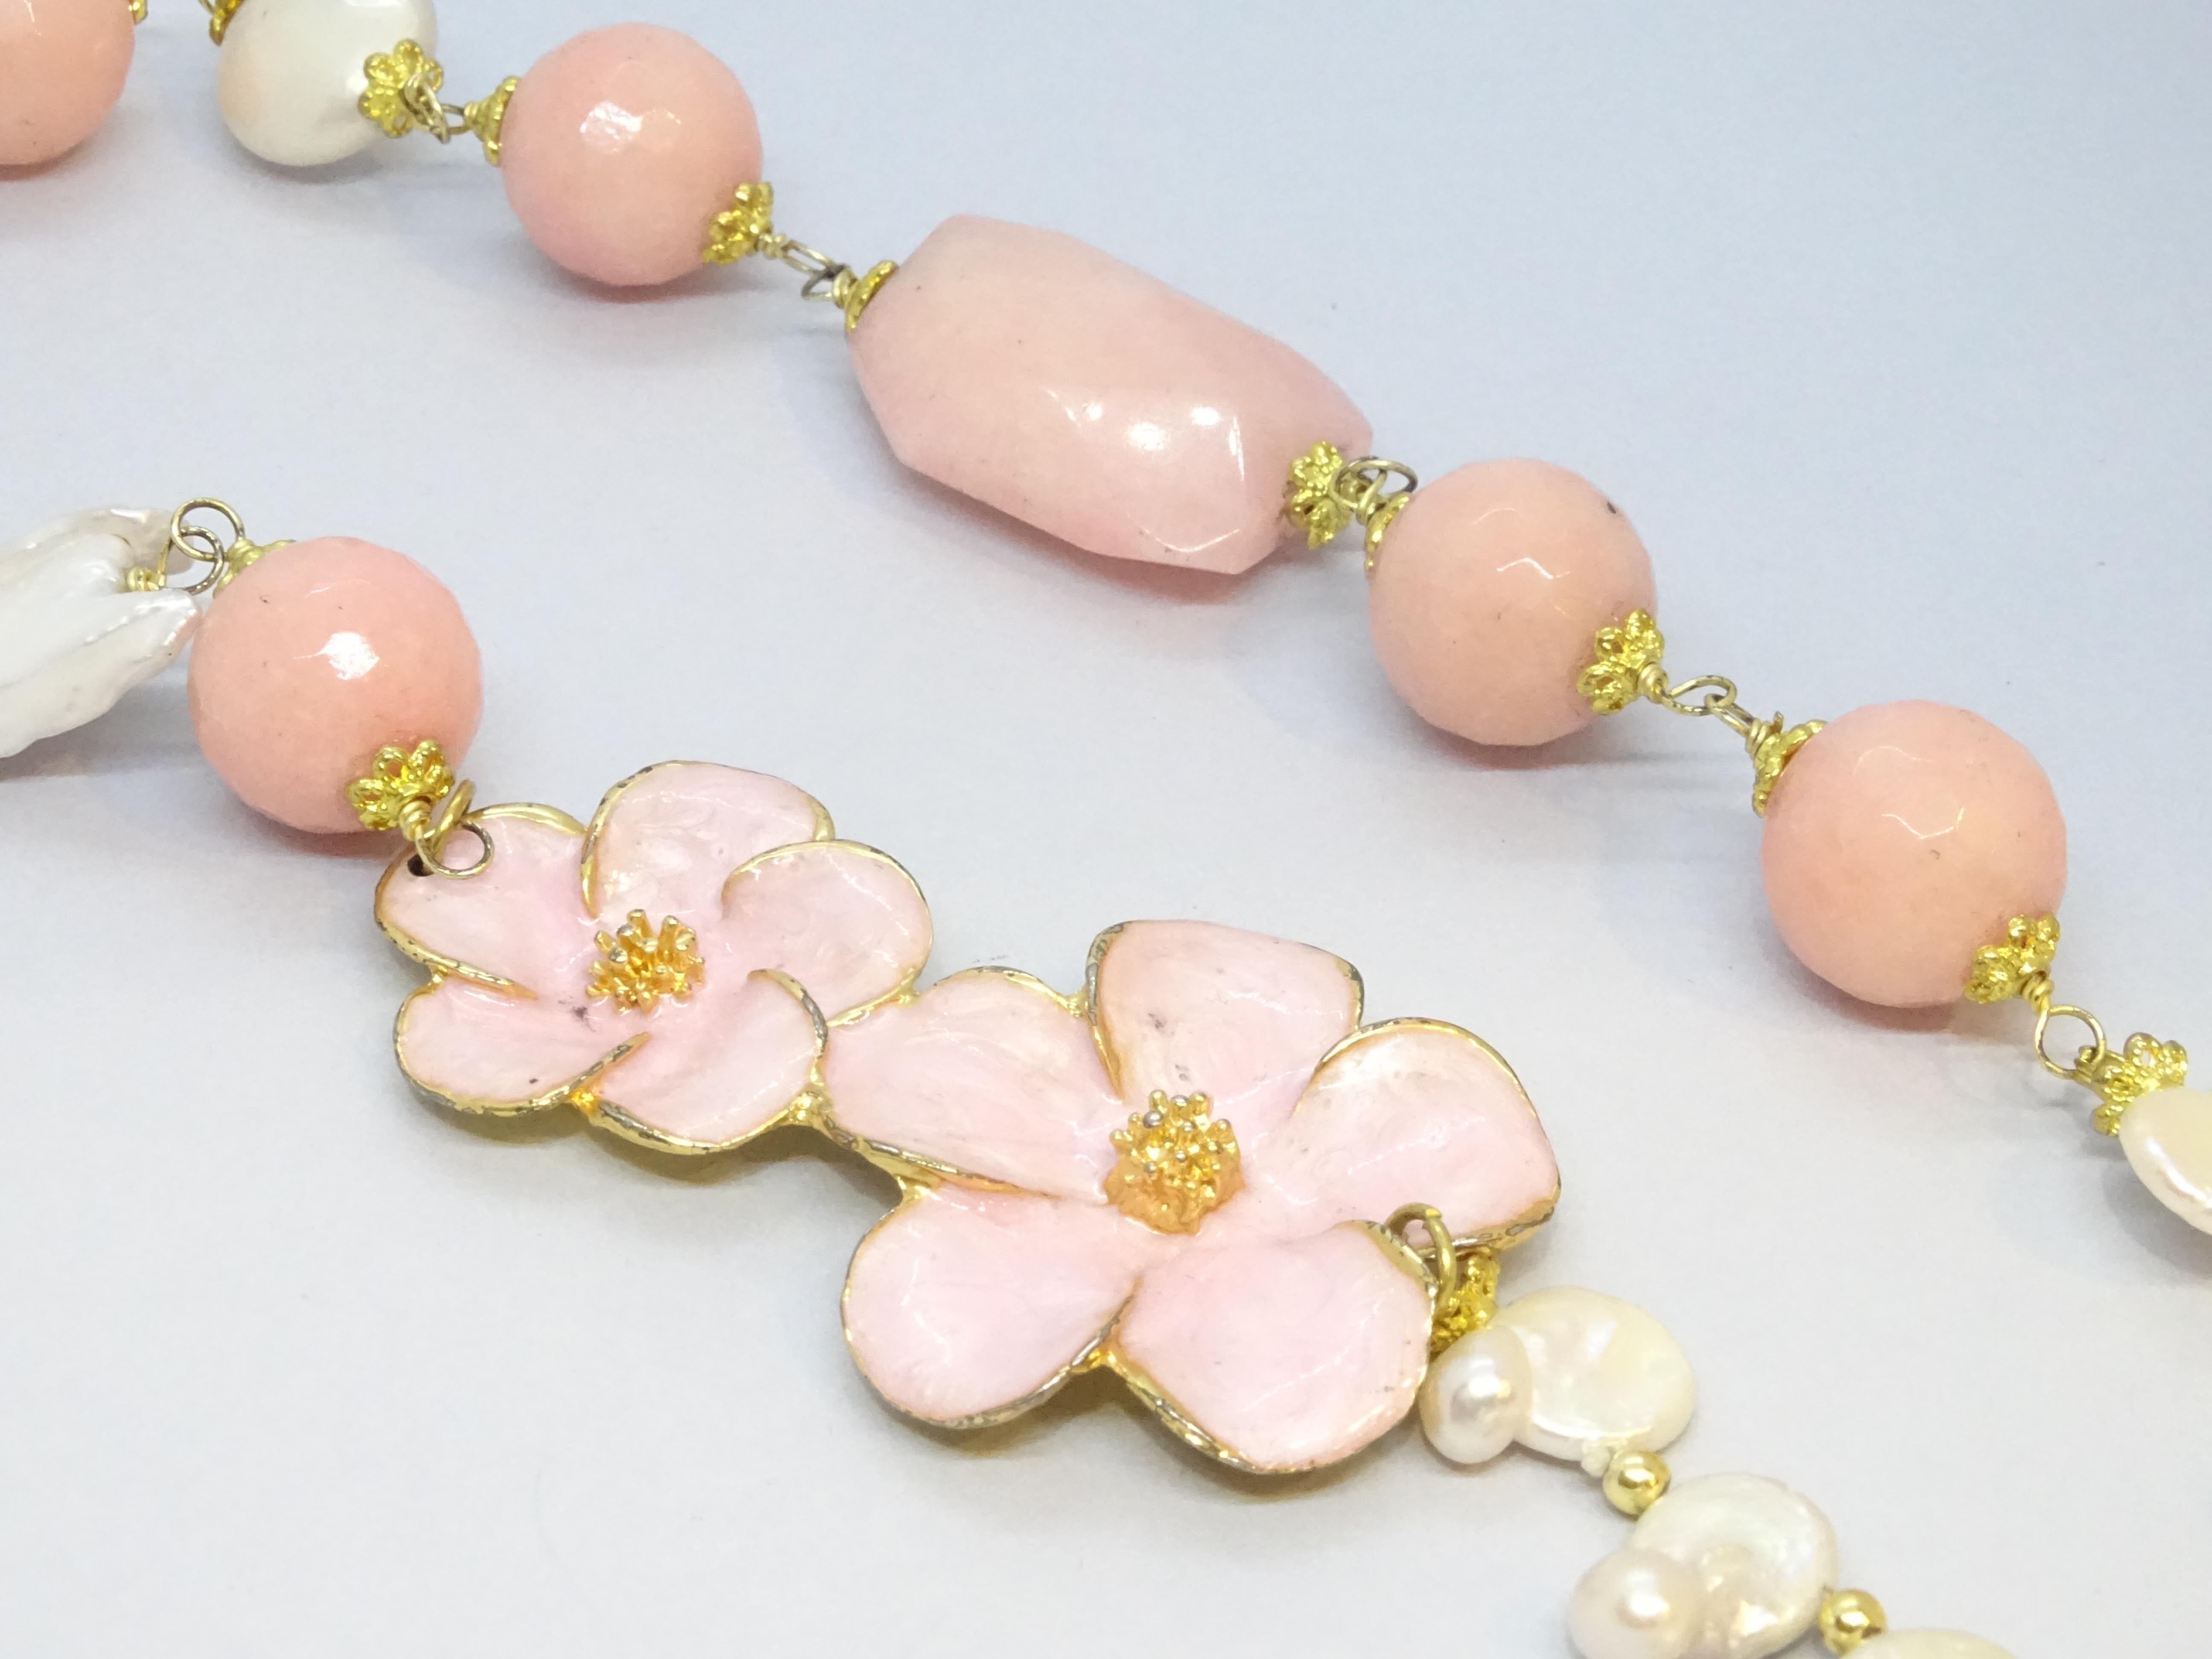 Italian necklace with baroque pearls, rose quartz and enamel For Sale 9